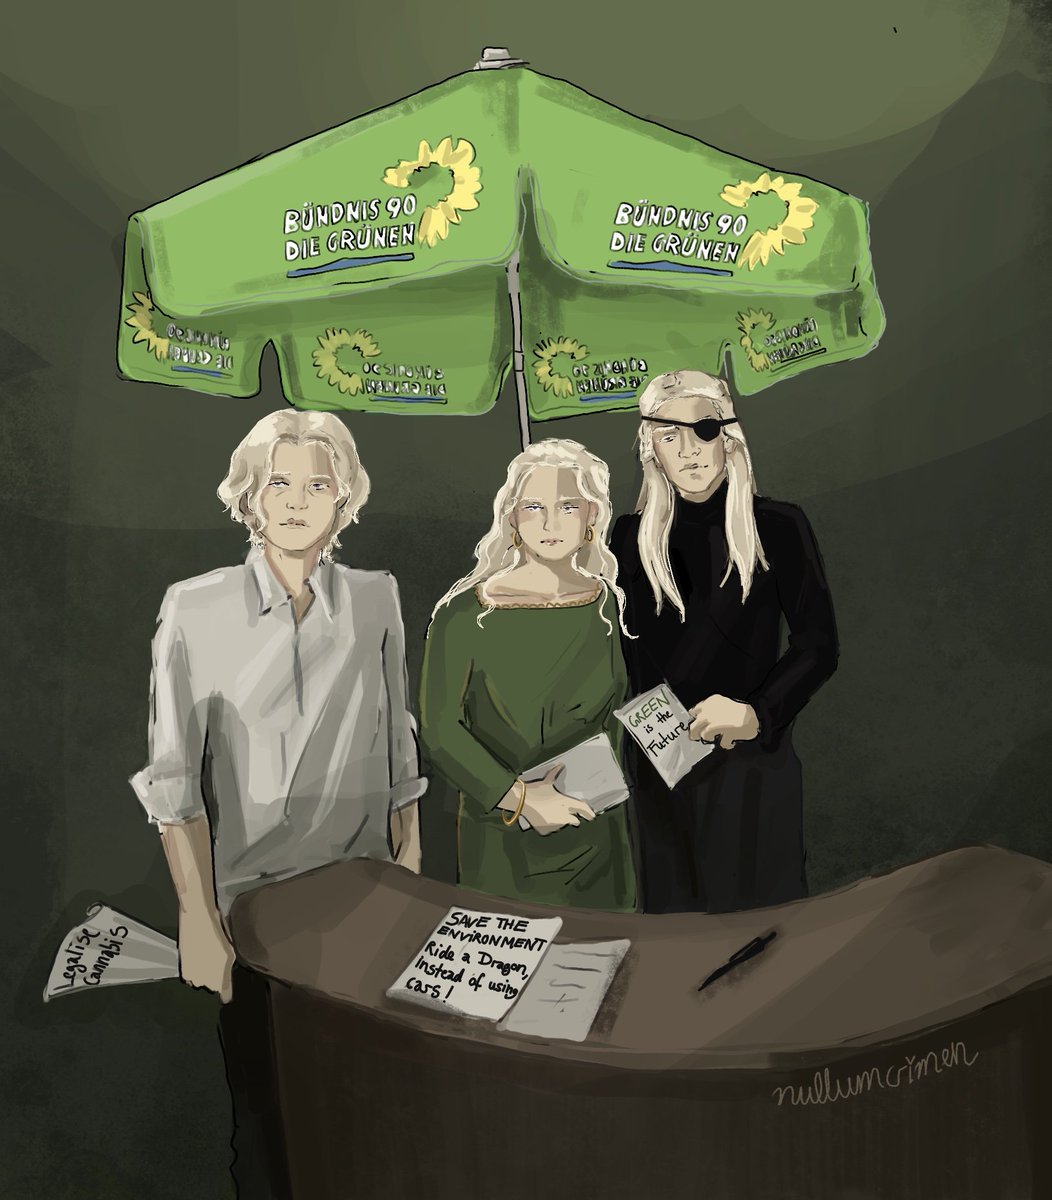 me after watching hotd in german:
Save the environment, ride a dragon! 
('die Grünen' translates into 'the greens', but is also a political party in germany so I had to giggle at times)
#HouseOfTheDragon #AegonIITargaryen #helenatargaryen #AemondTargaryen #thegreens #DieGruenen